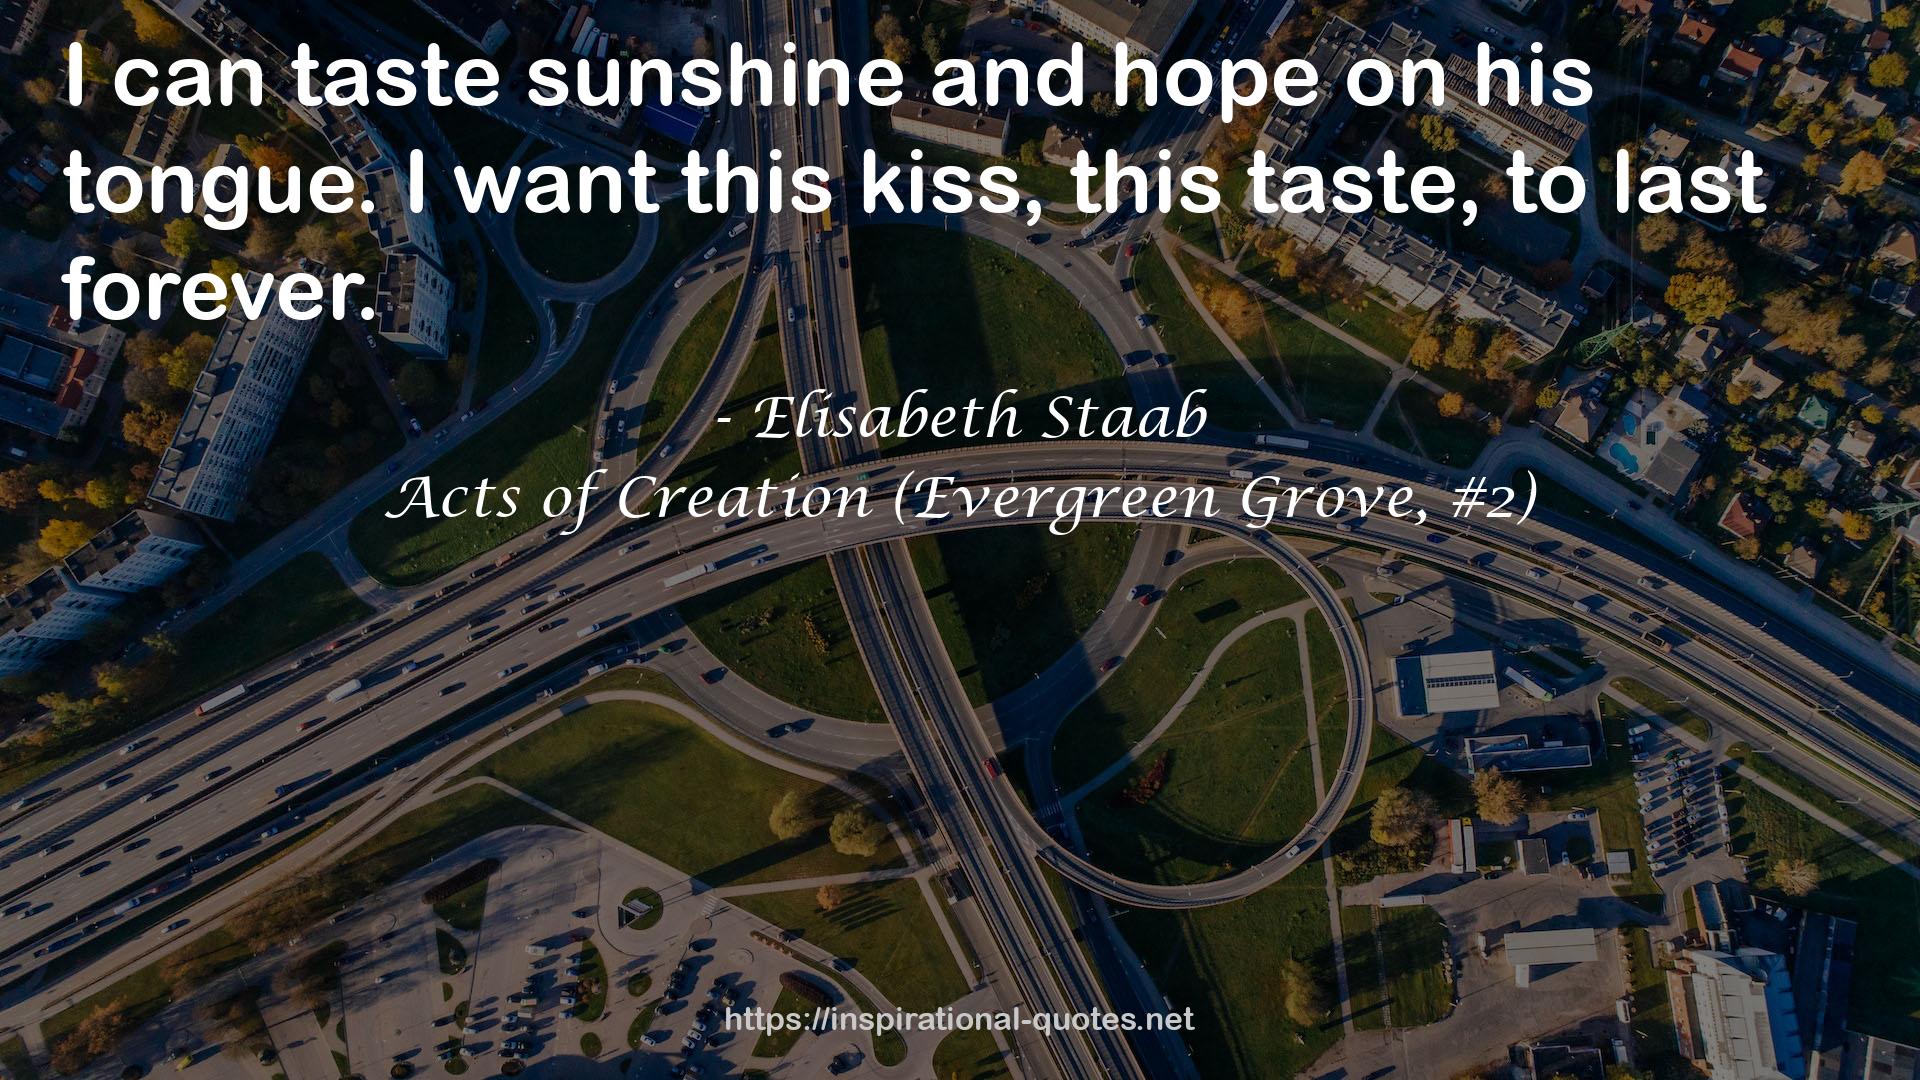 Elisabeth Staab QUOTES